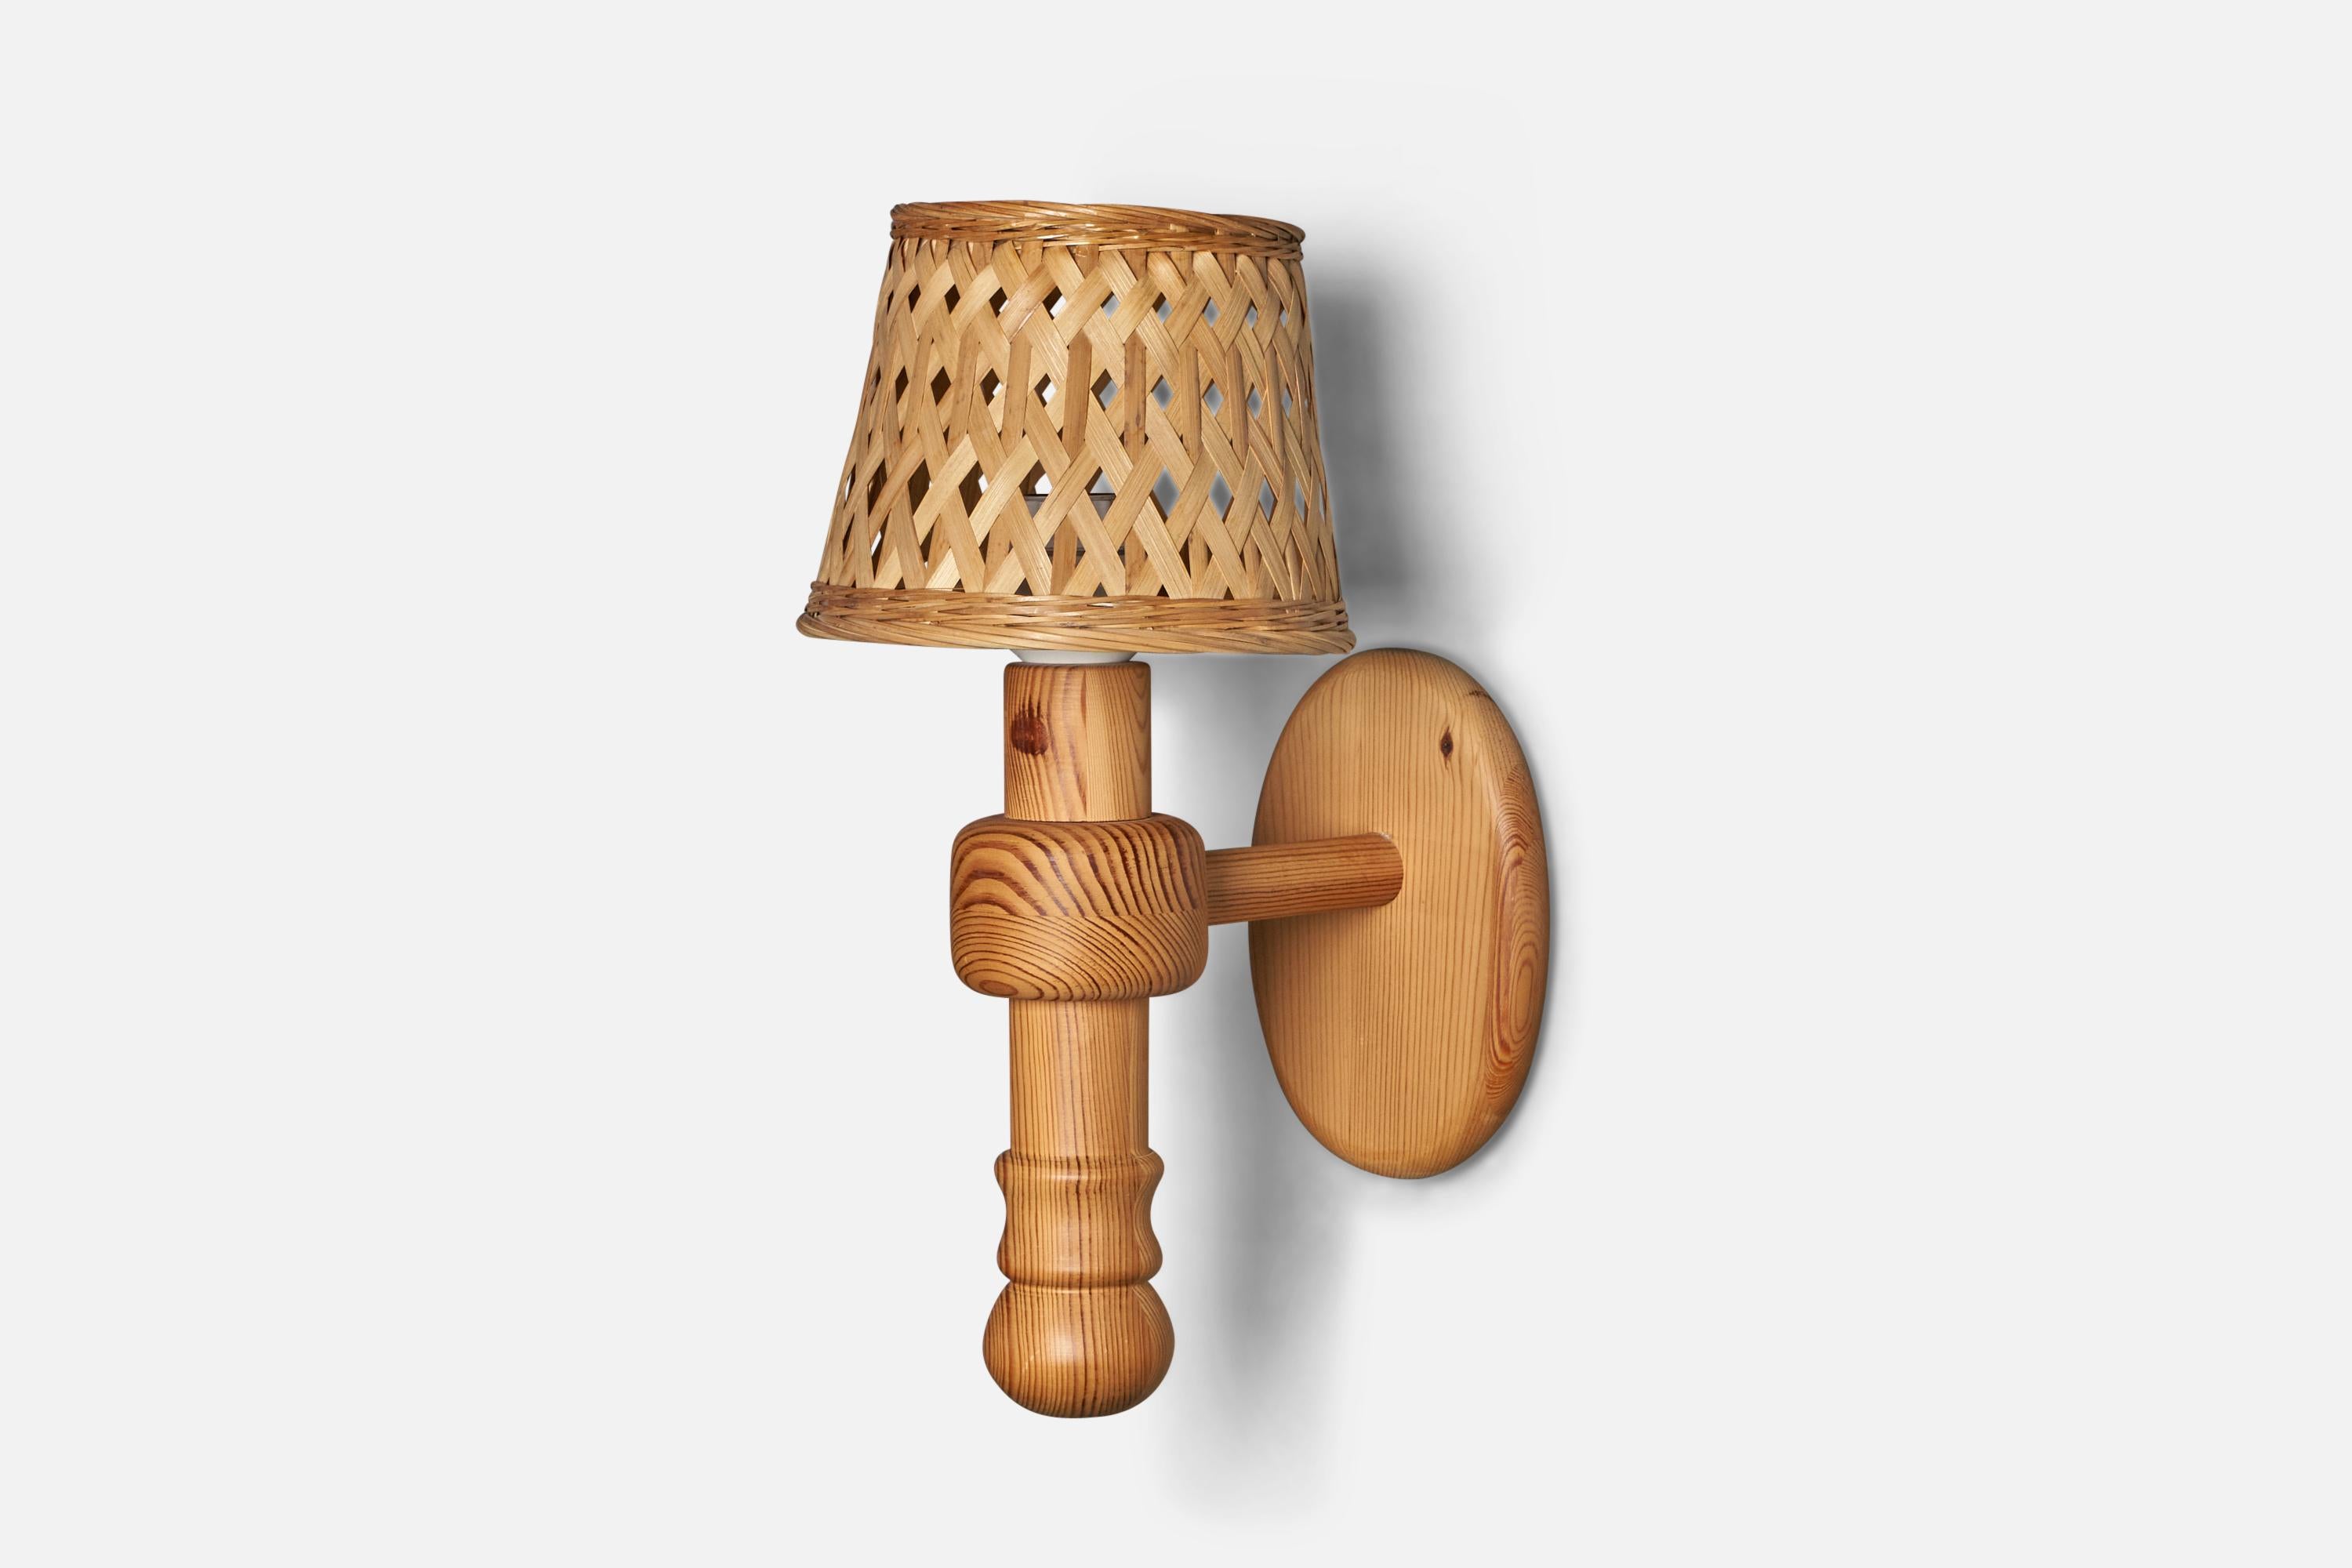 A sizeable pine and rattan wall light designed and produced in Sweden, 1970s.

Overall Dimensions (inches): 16